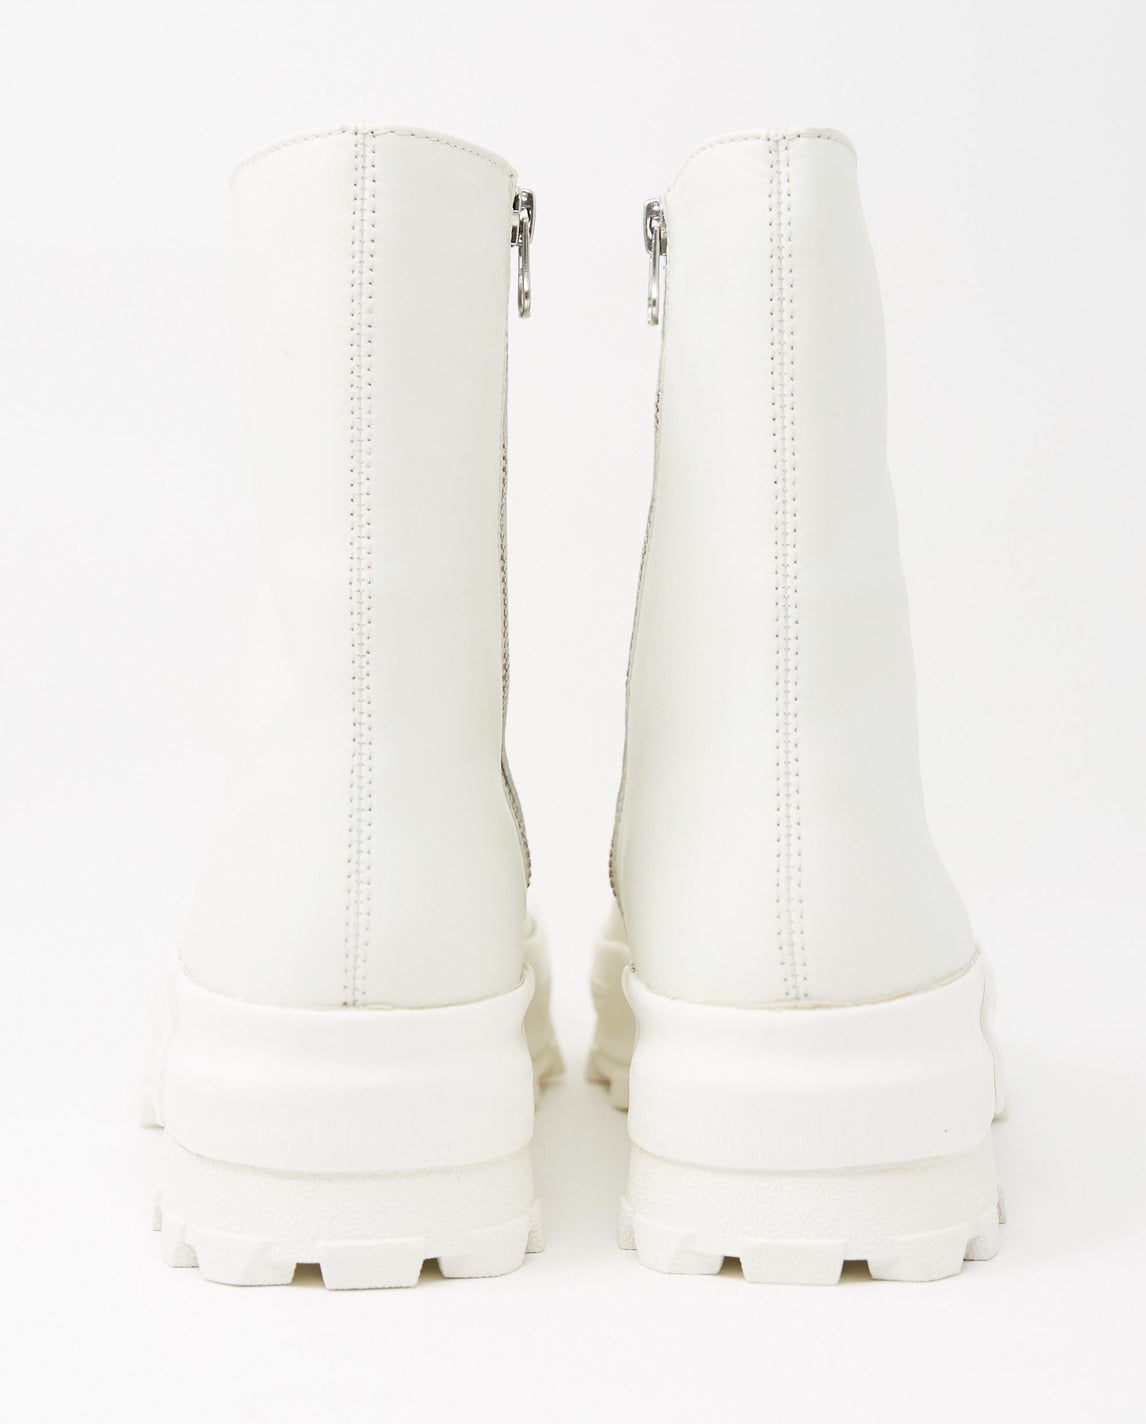 camper white boots